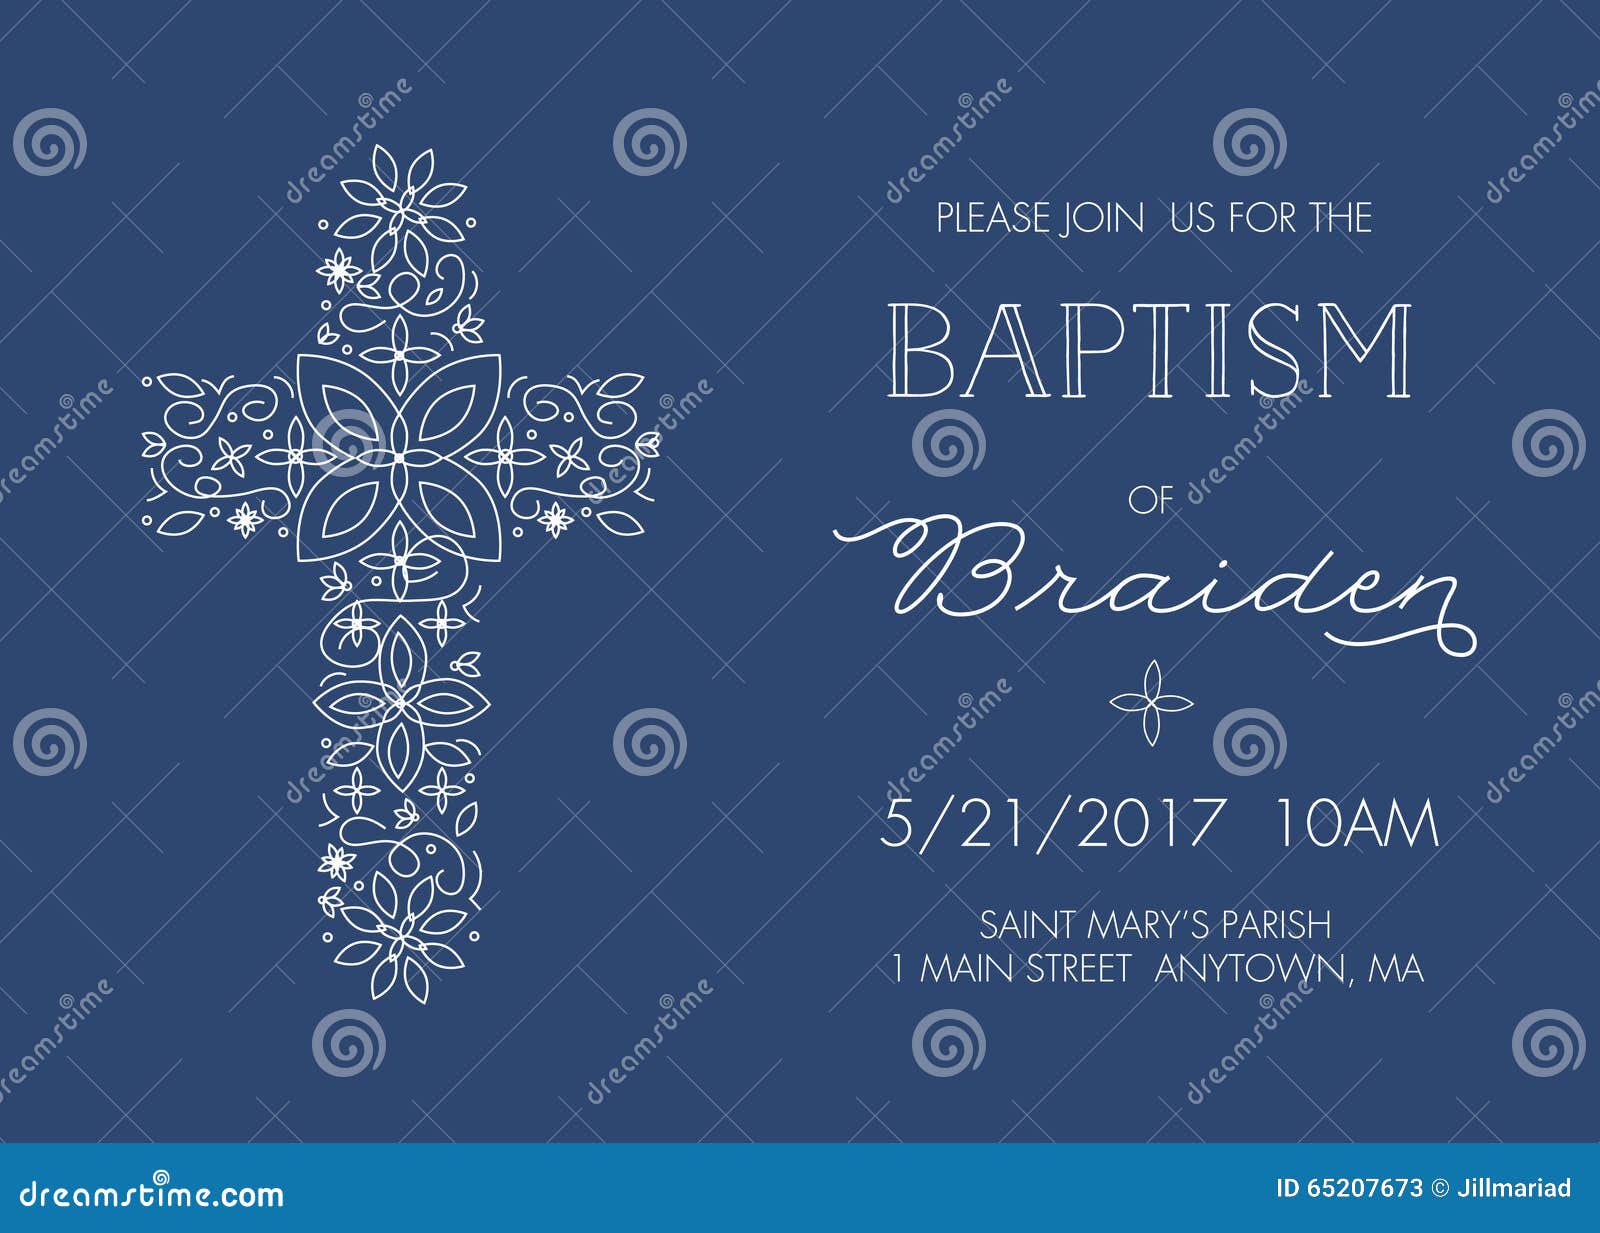 baptism, christening invitation template with ornate cross  - 